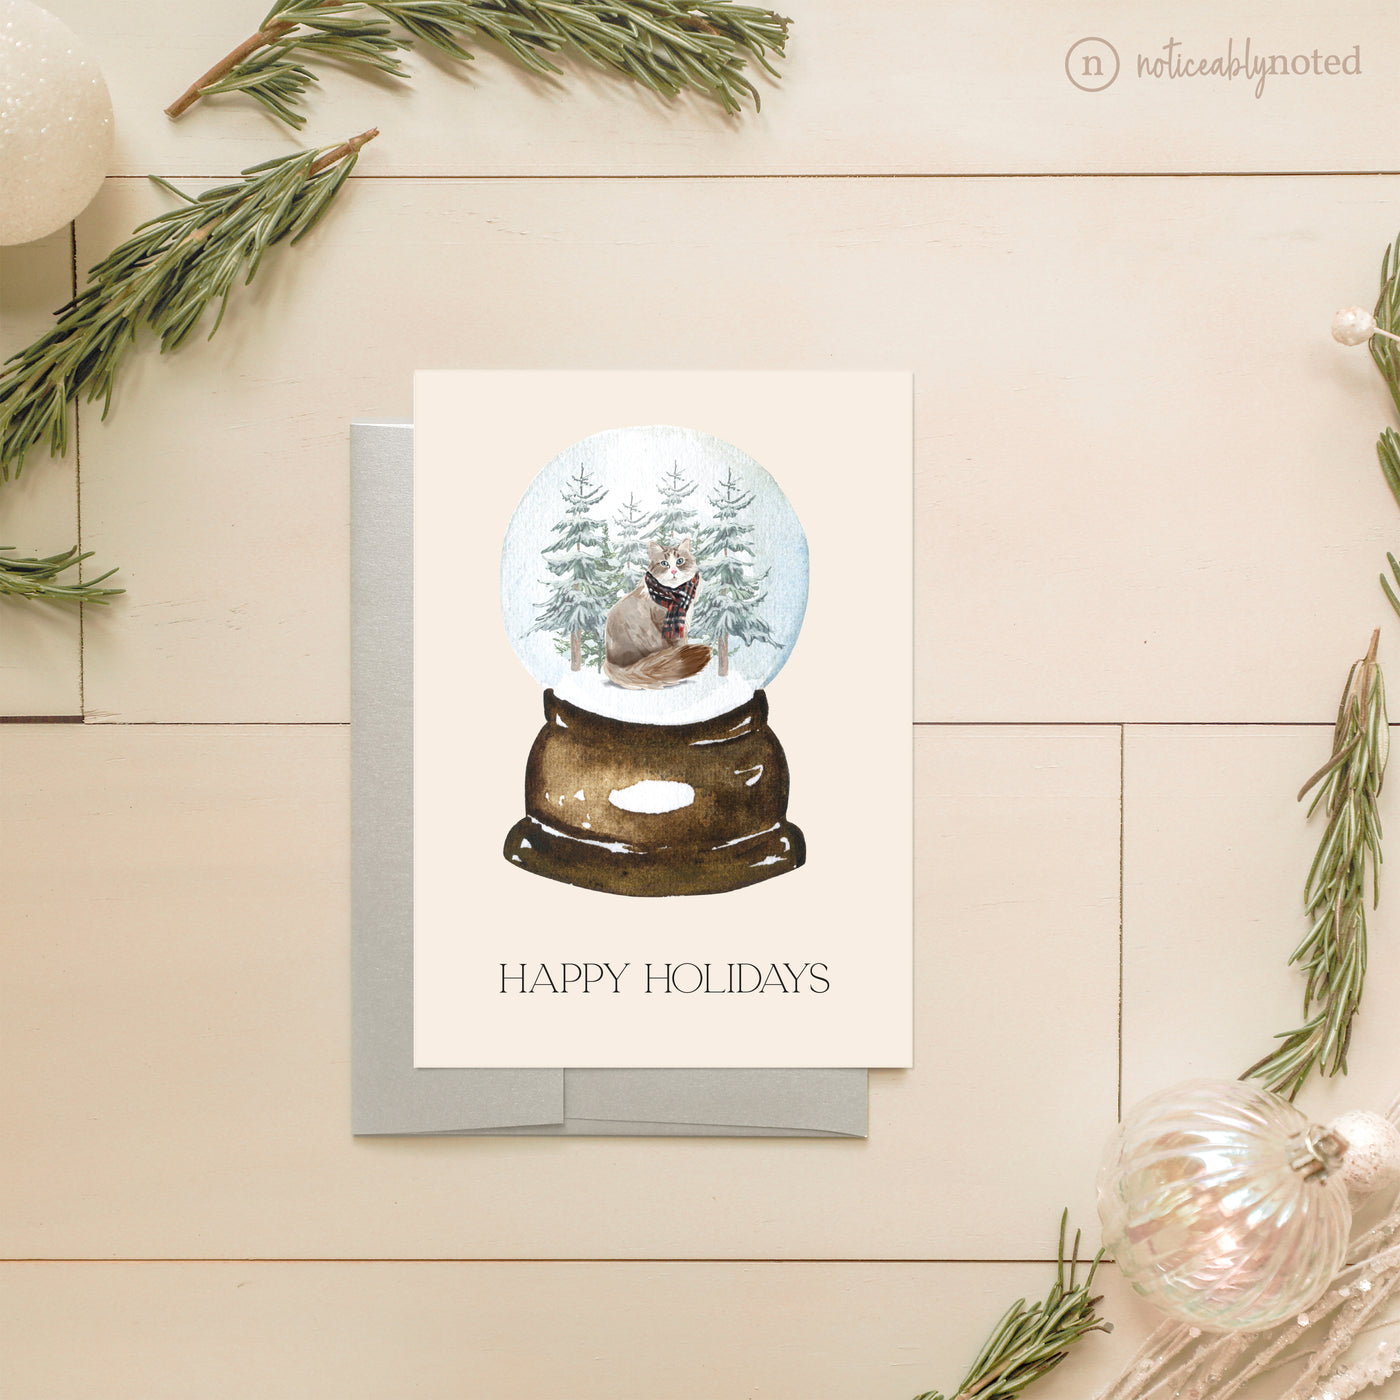 Siberian Holiday Greeting Cards | Noticeably Noted